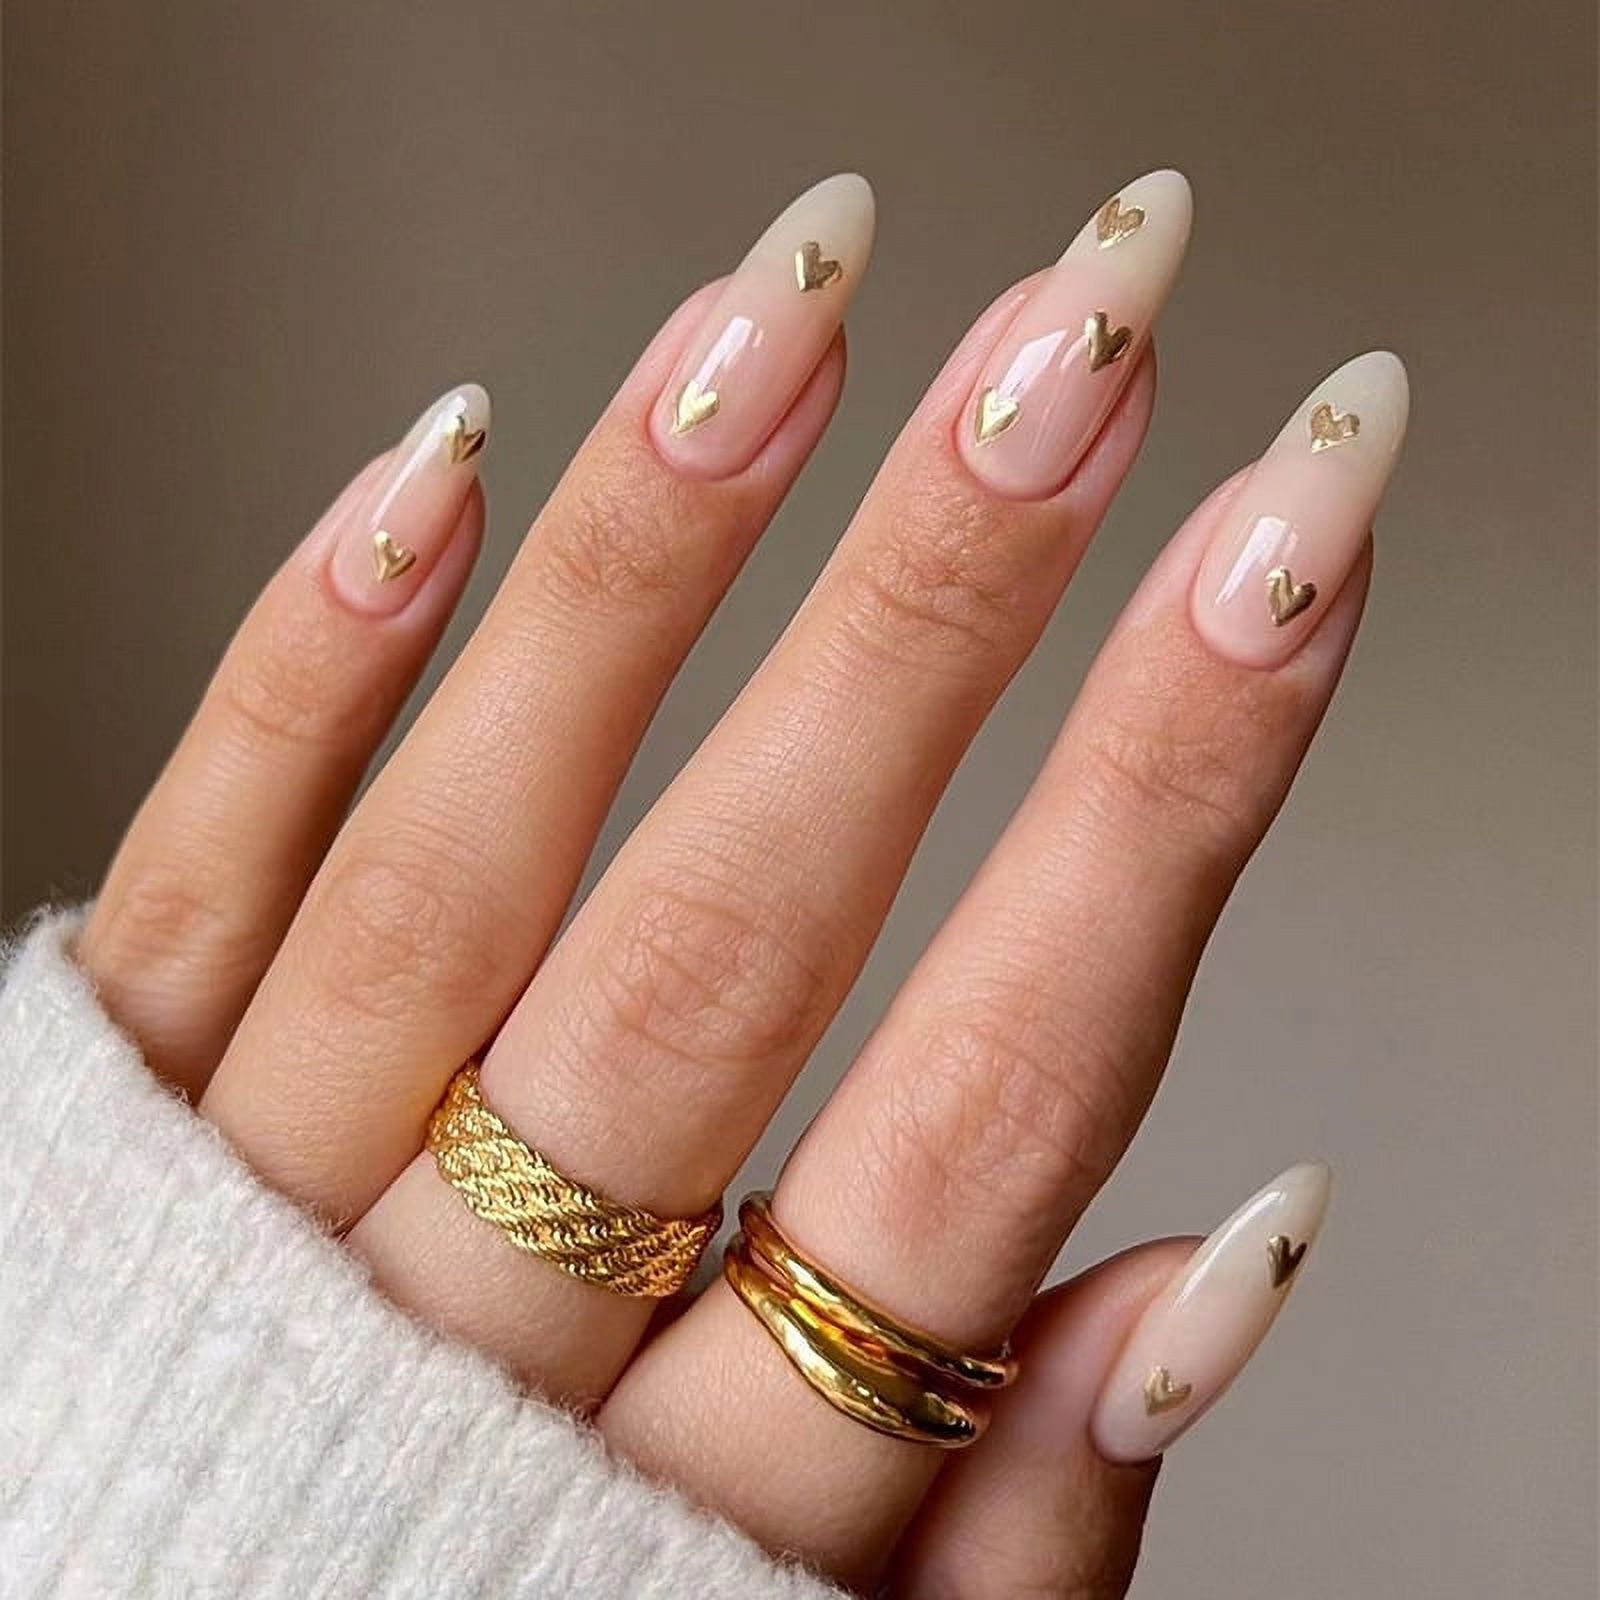 Rainsin Long Pointed Shape with Gold Heart Motif Press on Nails,Full  Coverage Glossy Ladies' False Nails,Valentine's Day Gifts for Women 